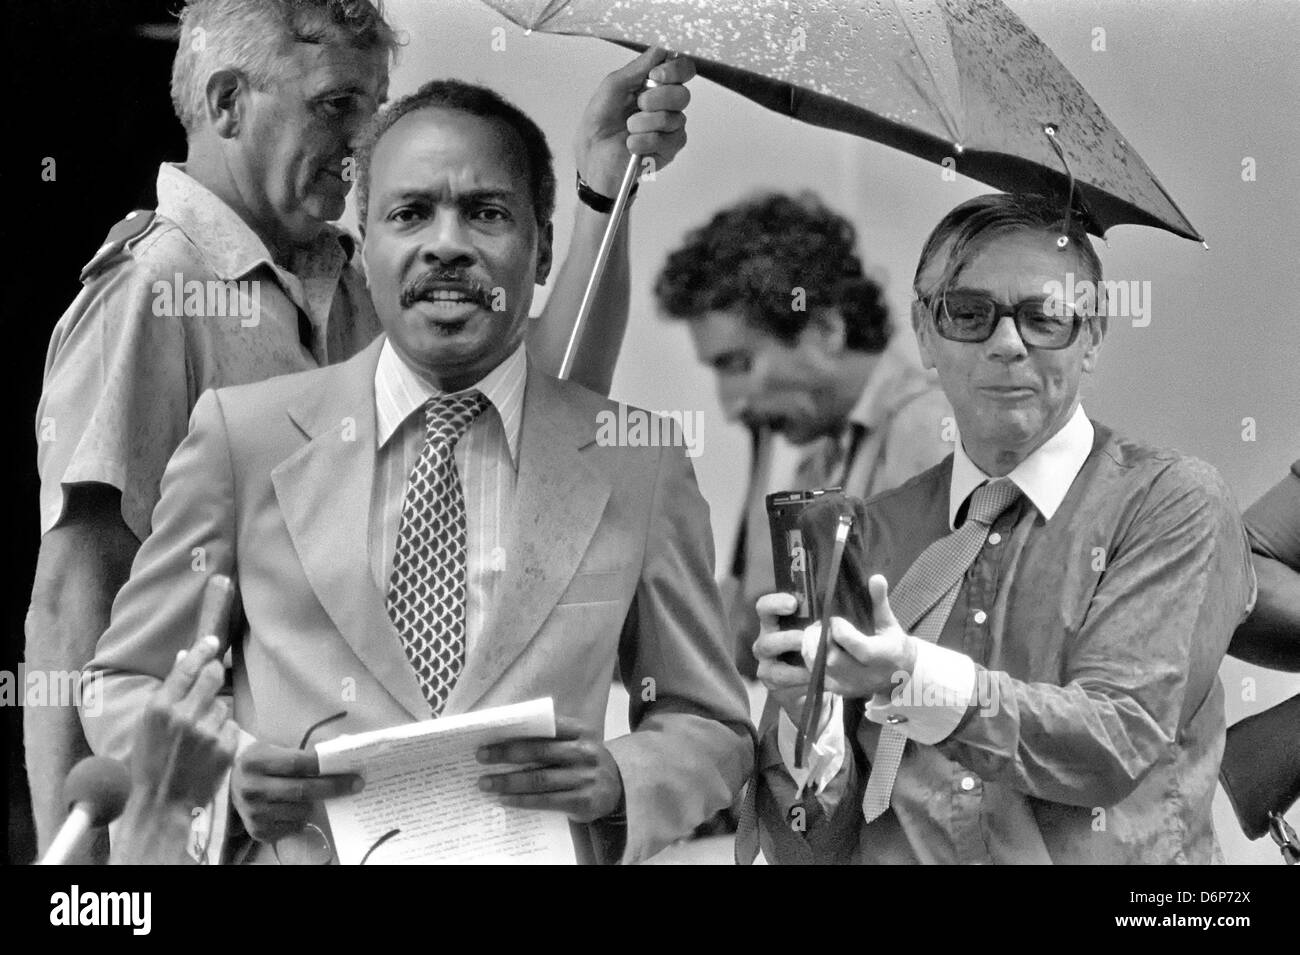 Governor-General Sir Paul Scoon speaks to members of the media after taking over as head of the new provisional government following the Invasion of Grenada, codenamed Operation Urgent Fury November 9, 1983 in St. Georges, Grenada. The invasion began on October 25, 1983 and was the first major military action by the United States since the end of the Vietnam War. Stock Photo